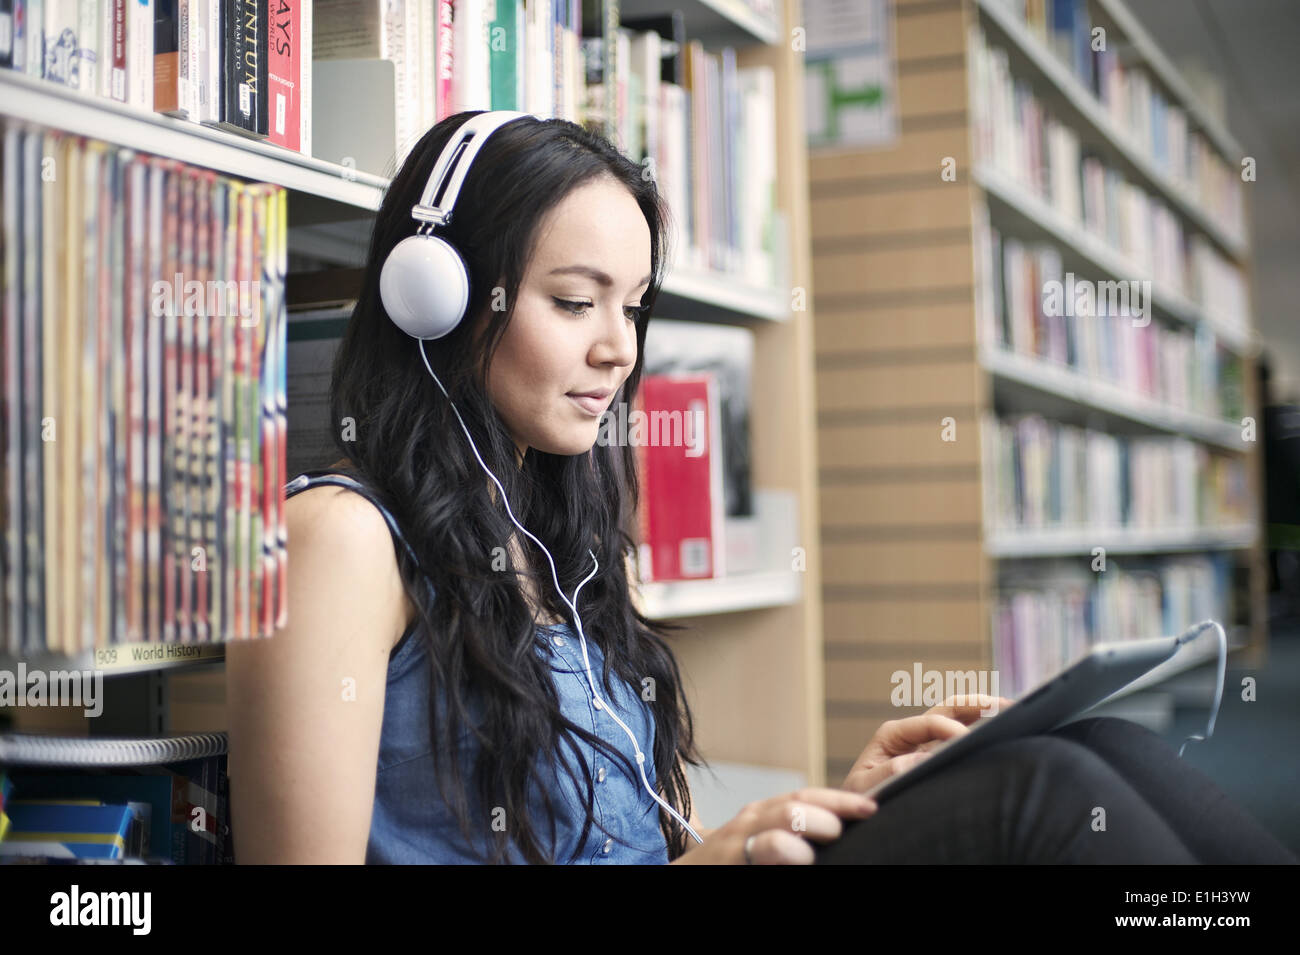 Young woman wearing headphones using digital tablet Stock Photo